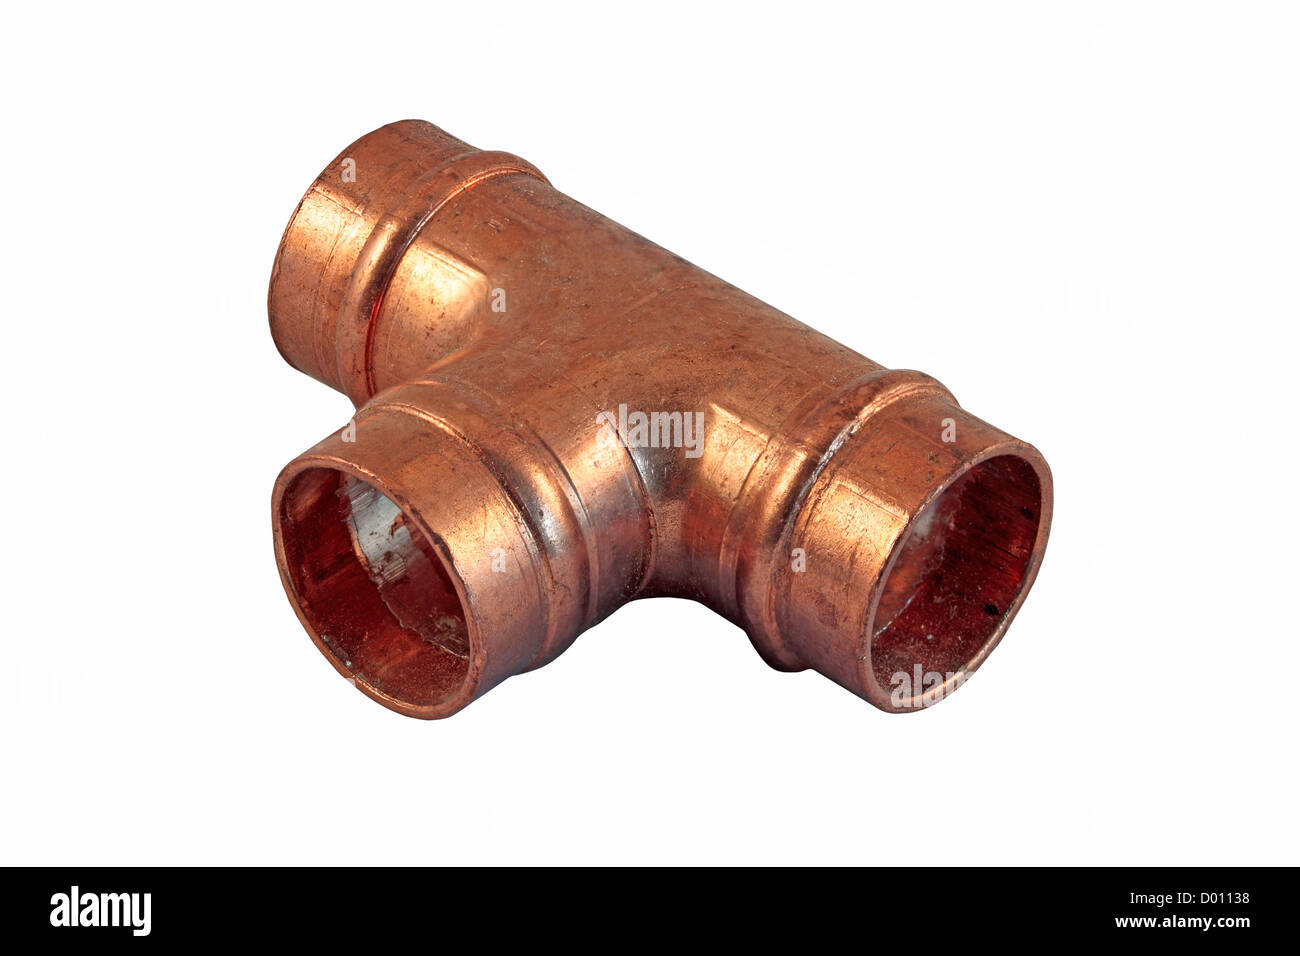 15mm bague d'étain Yorkshire Copper Tee Pipe Fitting Banque D'Images